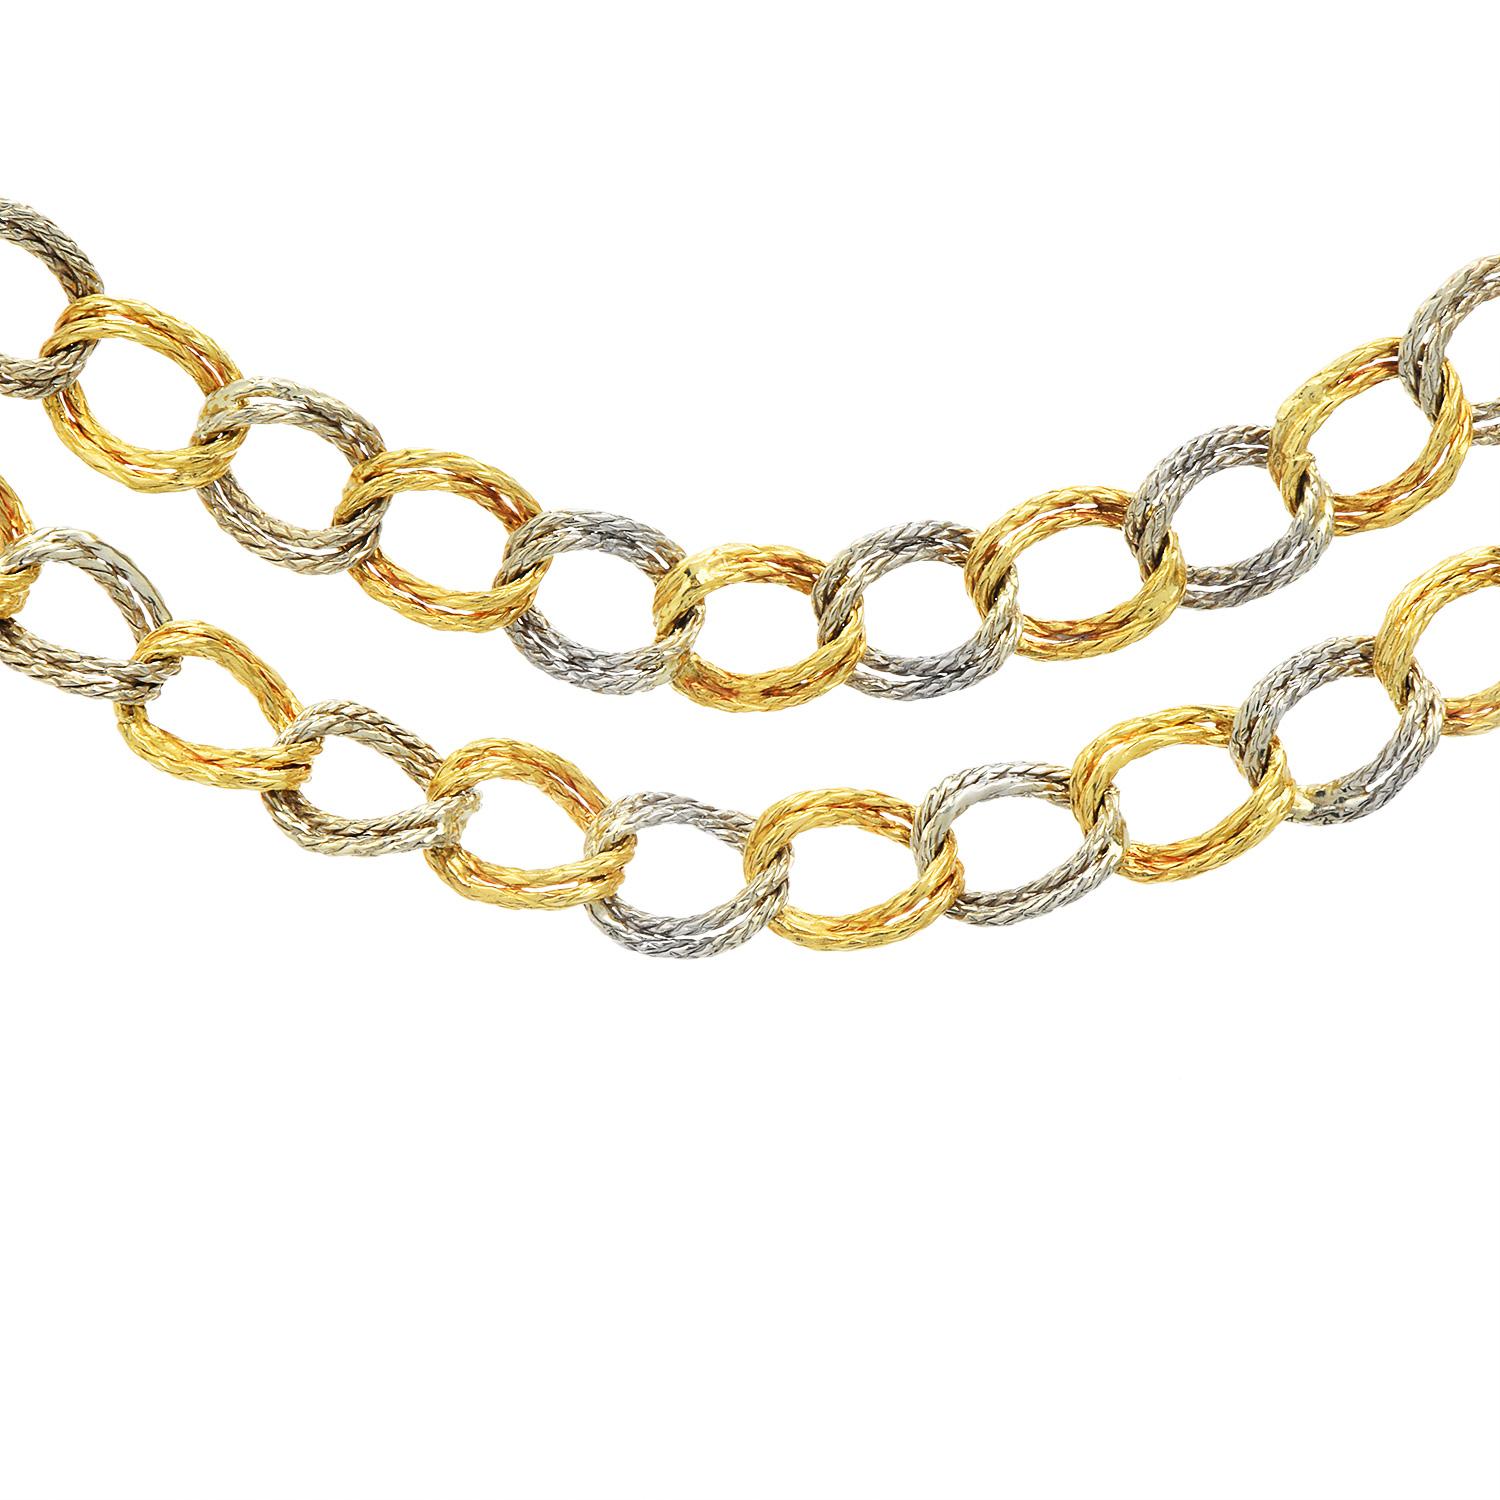 Women's or Men's Vintage Chic 18K Yellow White Gold Textured Link Chain Necklace